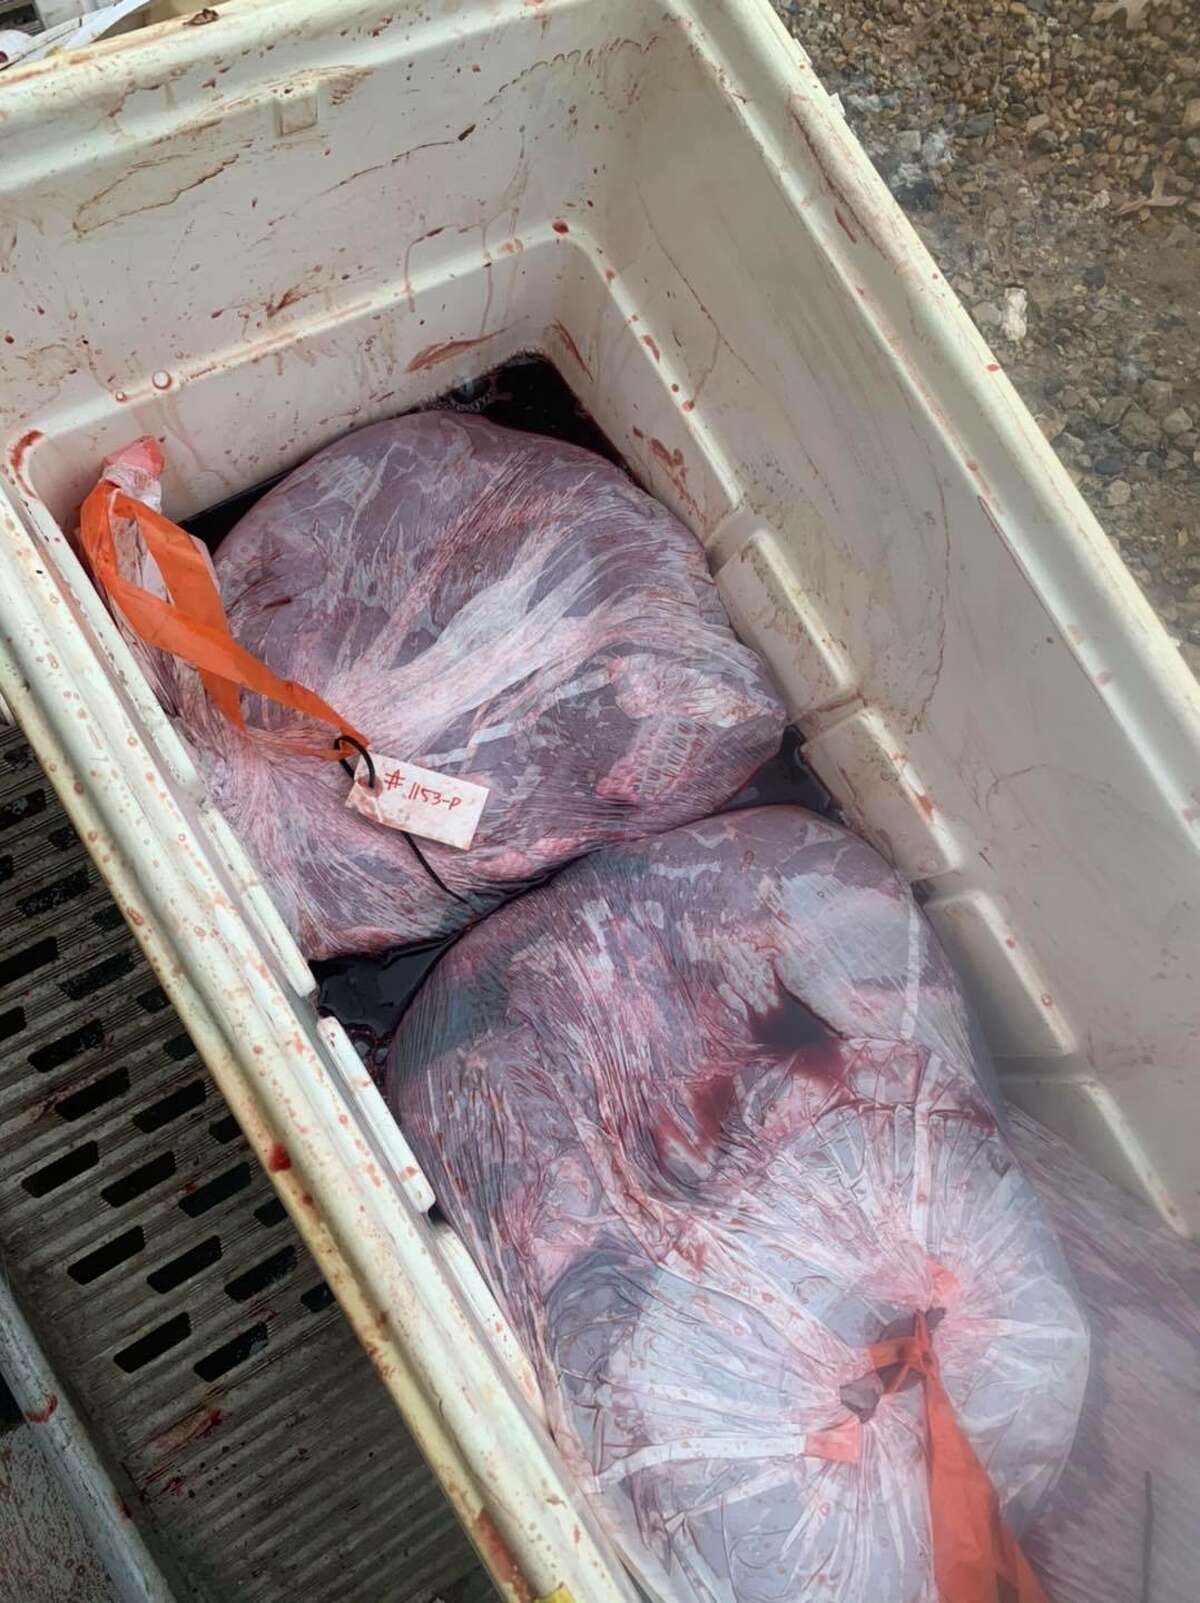 Texas Game Wardens posted about another meat processing bust where they found 22 deer unfit for human consumption on its Facebook page Friday. The wardens found the spoiled meat on Dec. 18 during a routine inspection at Backyard Taxidermy and Deer Processing in Decatur, which is a city about 40 miles north of Forth Worth.